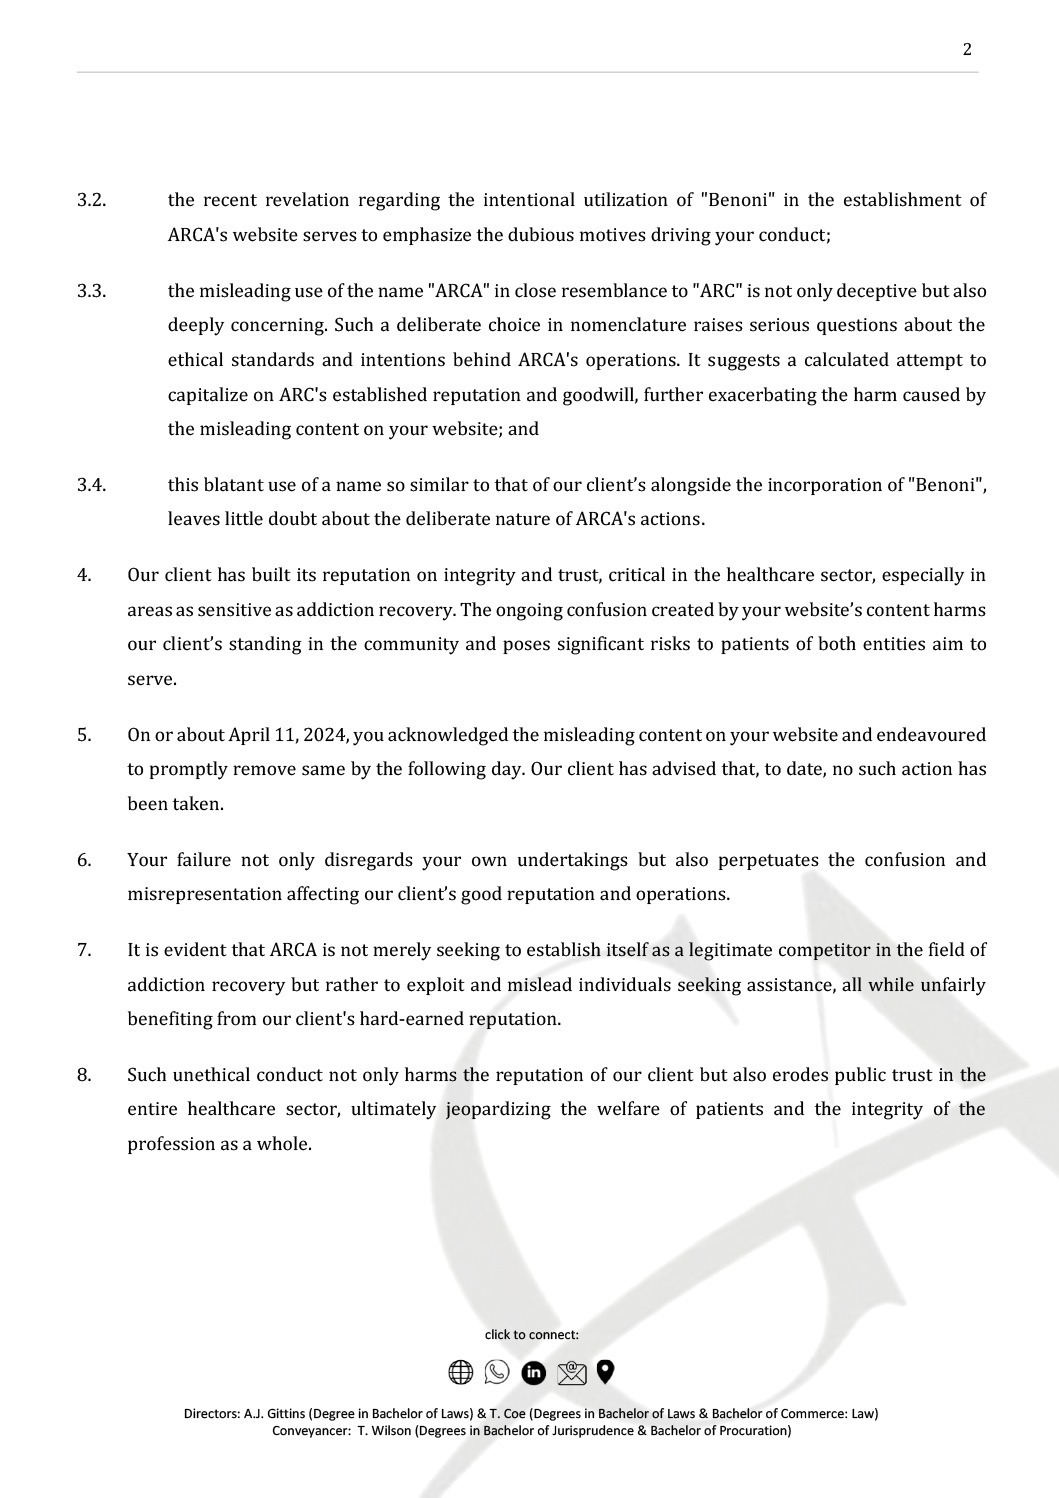 Formal demand letter to ARCA Johannesburg addressing alleged unethical actions.